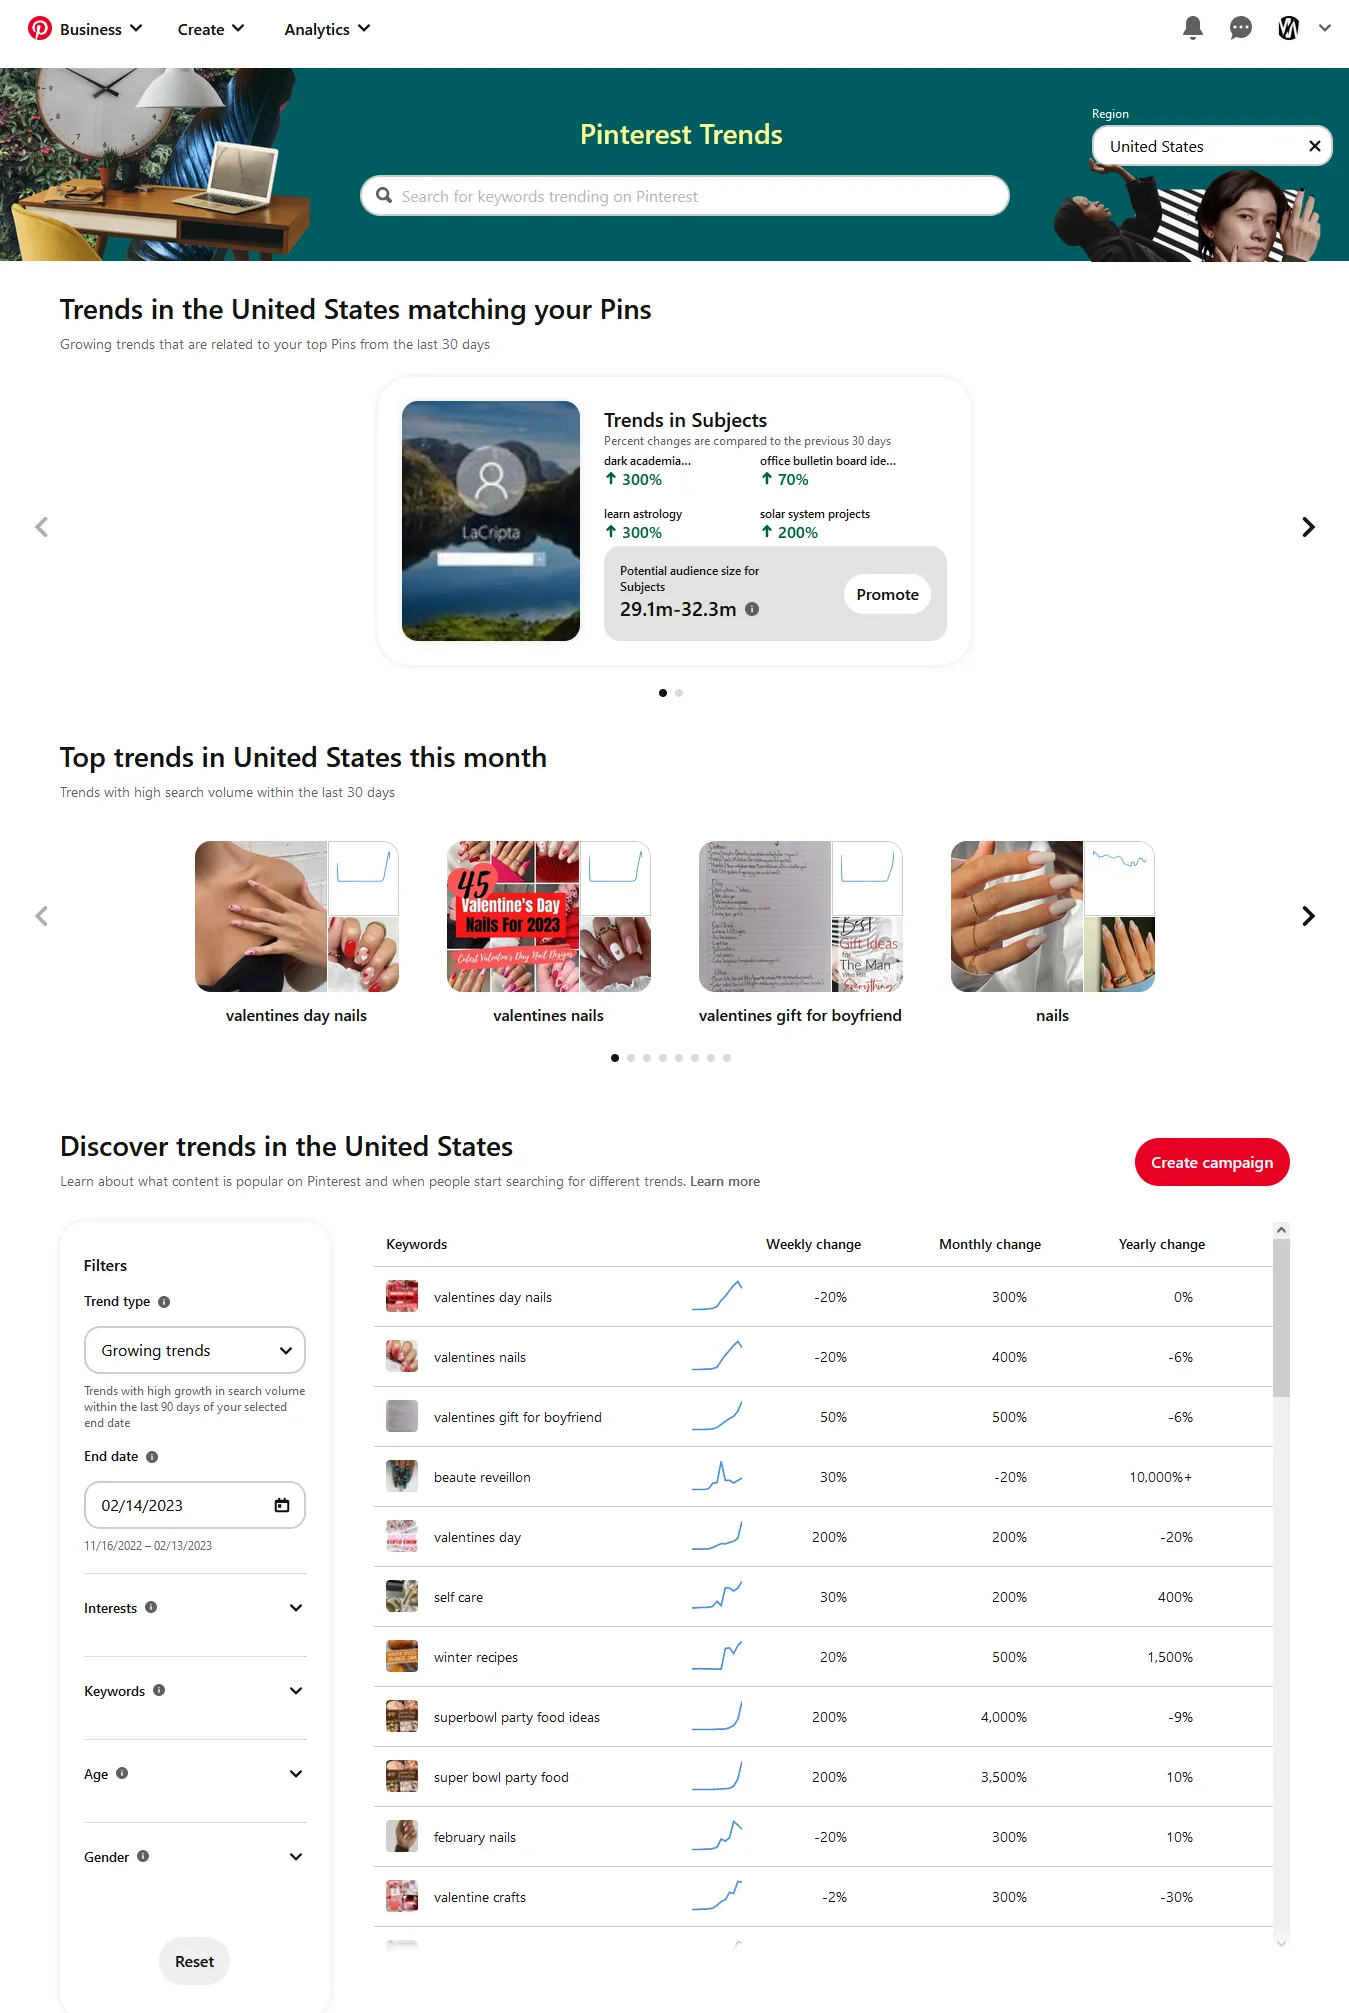 The Trends page shows the top and most popular trends related to your country/region on Pinterest filtered by Trend Types such as Top Monthly Trends, Top Yearly Trends, Growing Trends, & Seasonal Trends. 